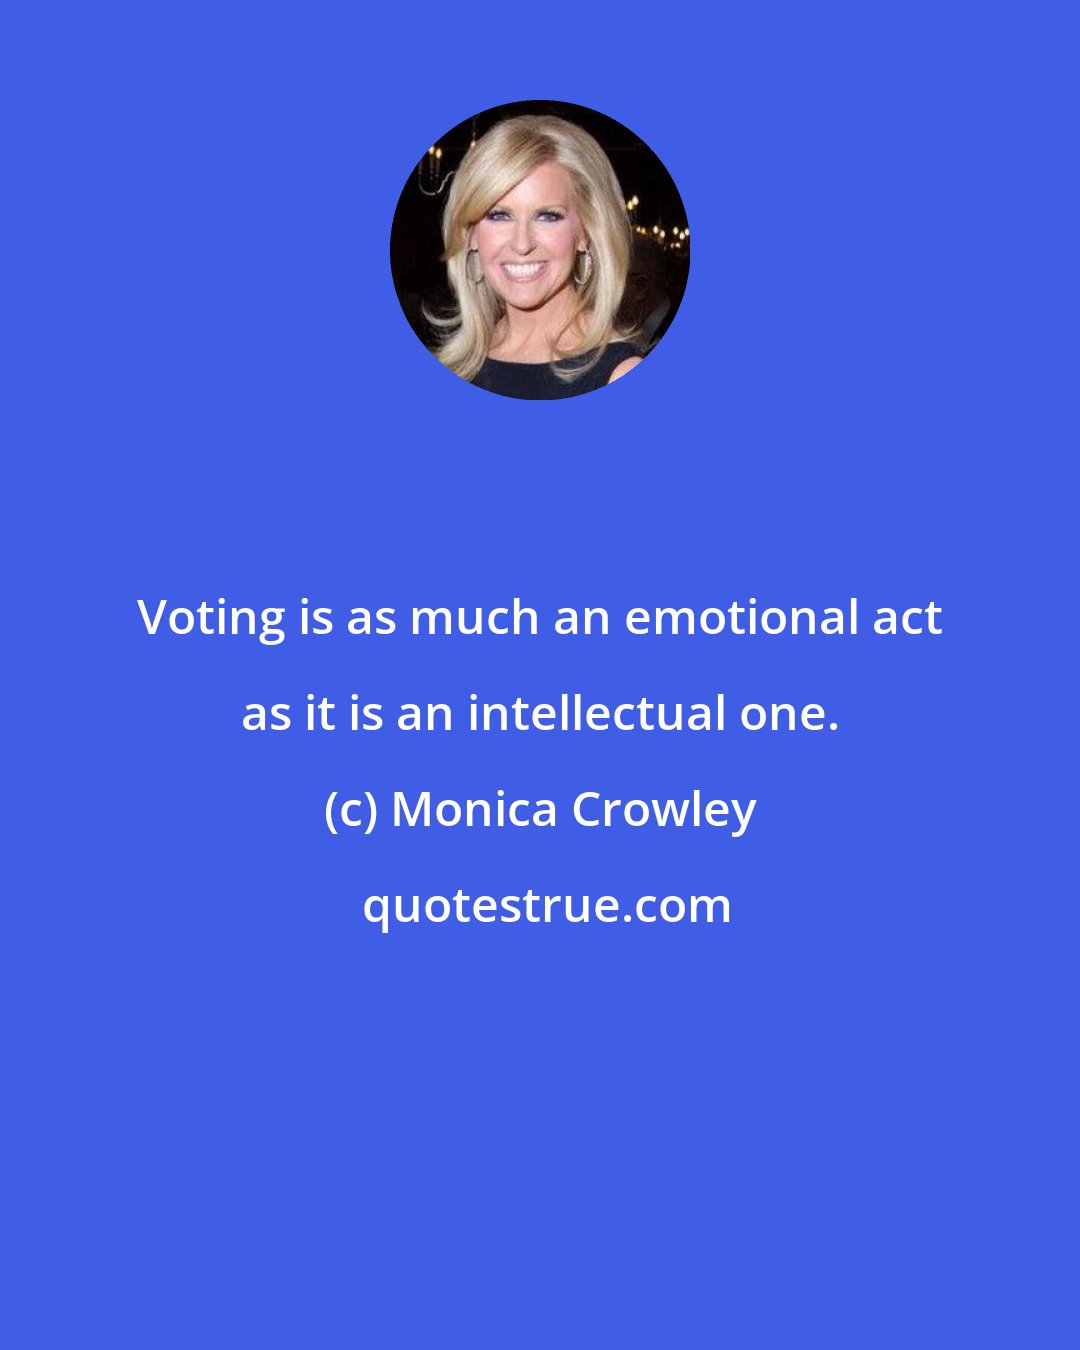 Monica Crowley: Voting is as much an emotional act as it is an intellectual one.